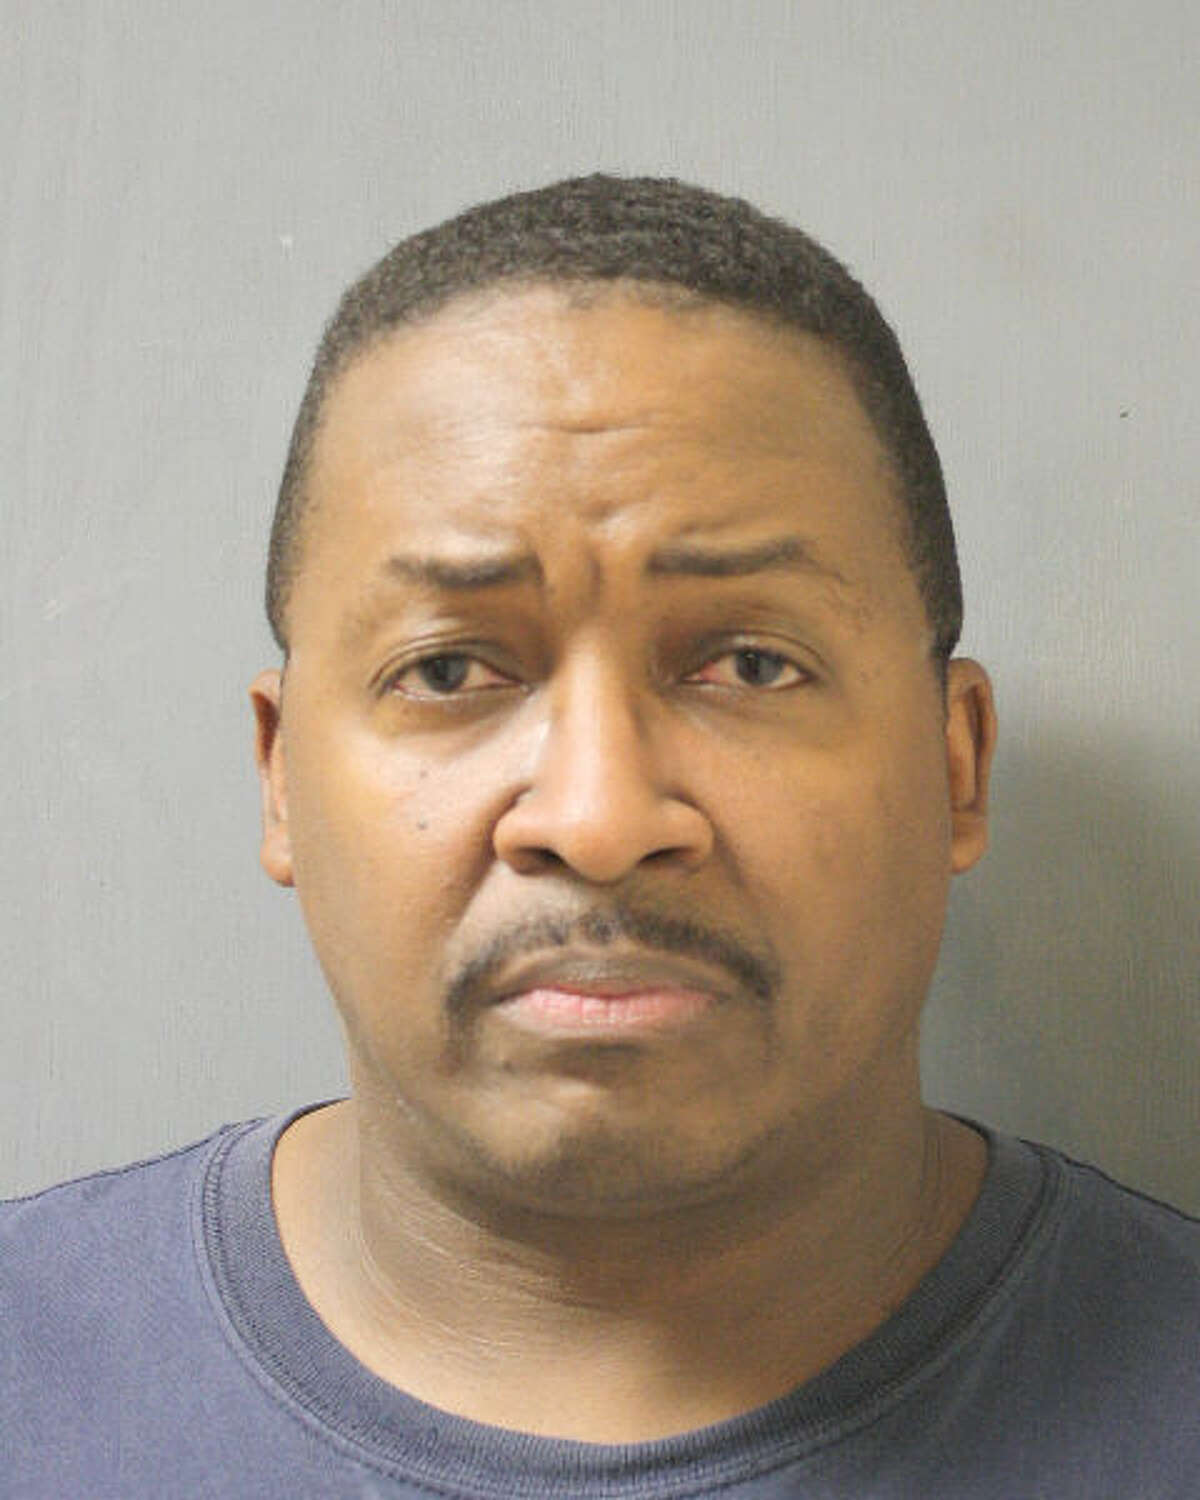 A Harris County grand jury no-billed Terence Ryans months after he was accused and arrested.